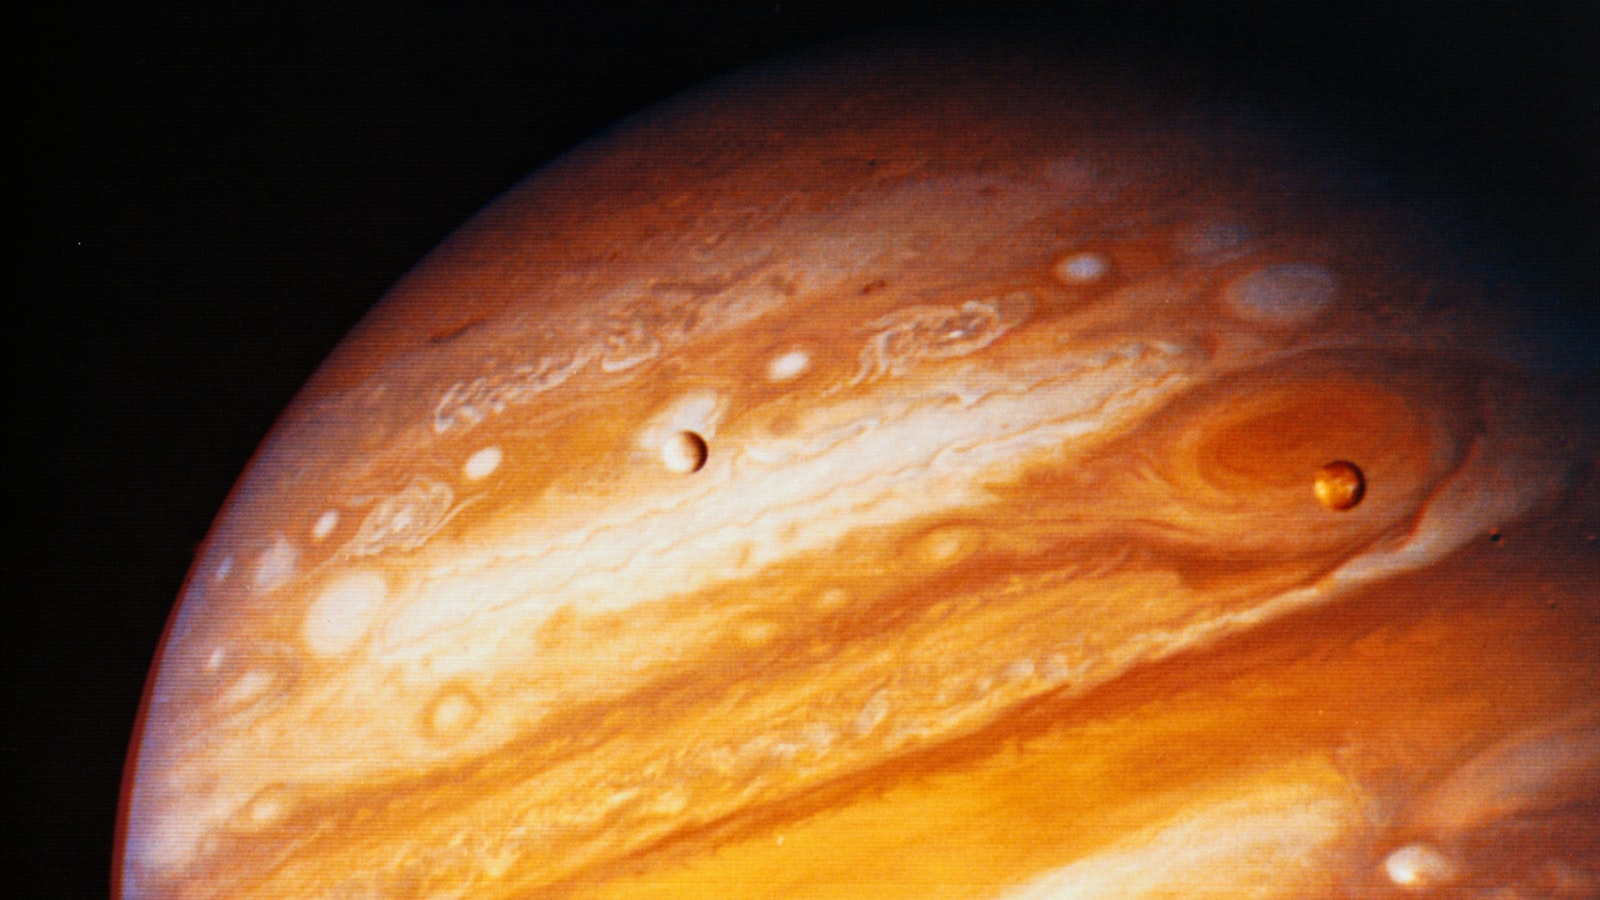 Jupiter and some of its moons as seen from Voyager 1.